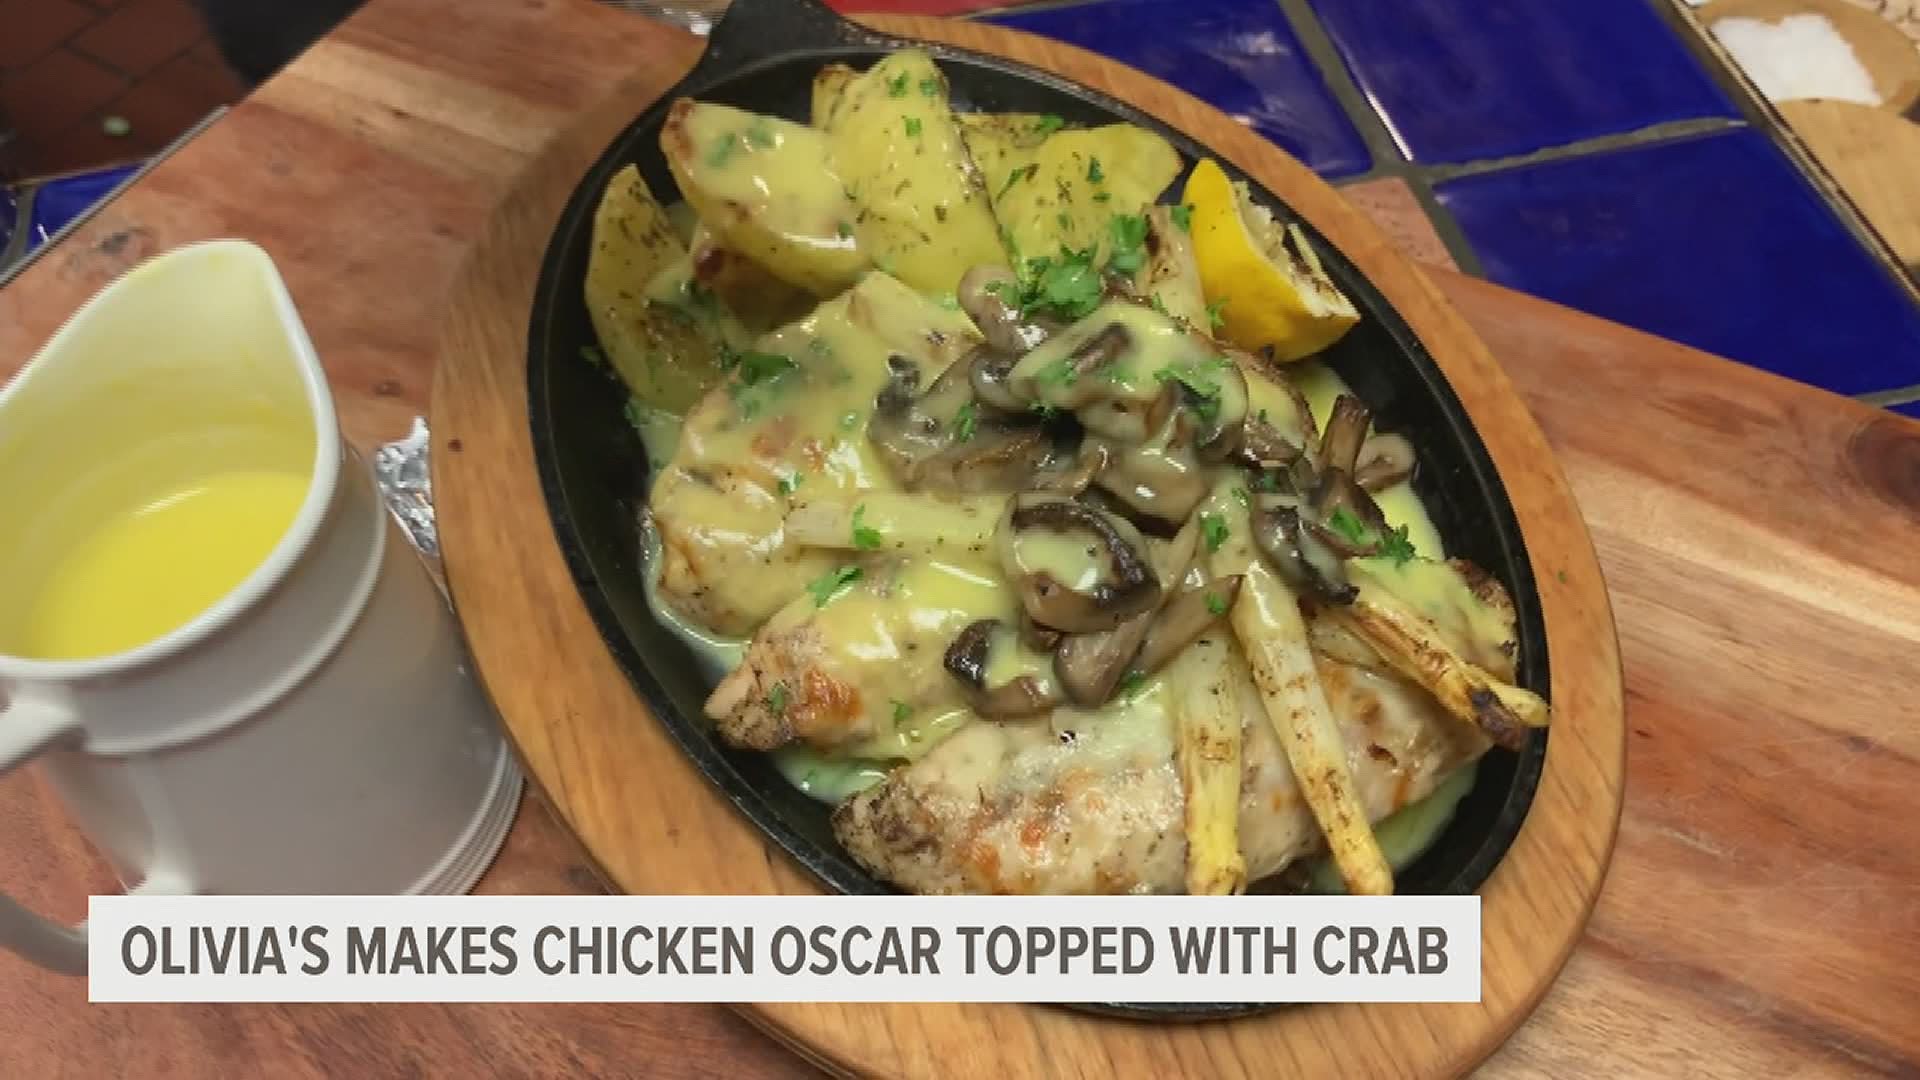 Olivia's Makes Chicken Oscar Topped with Crab